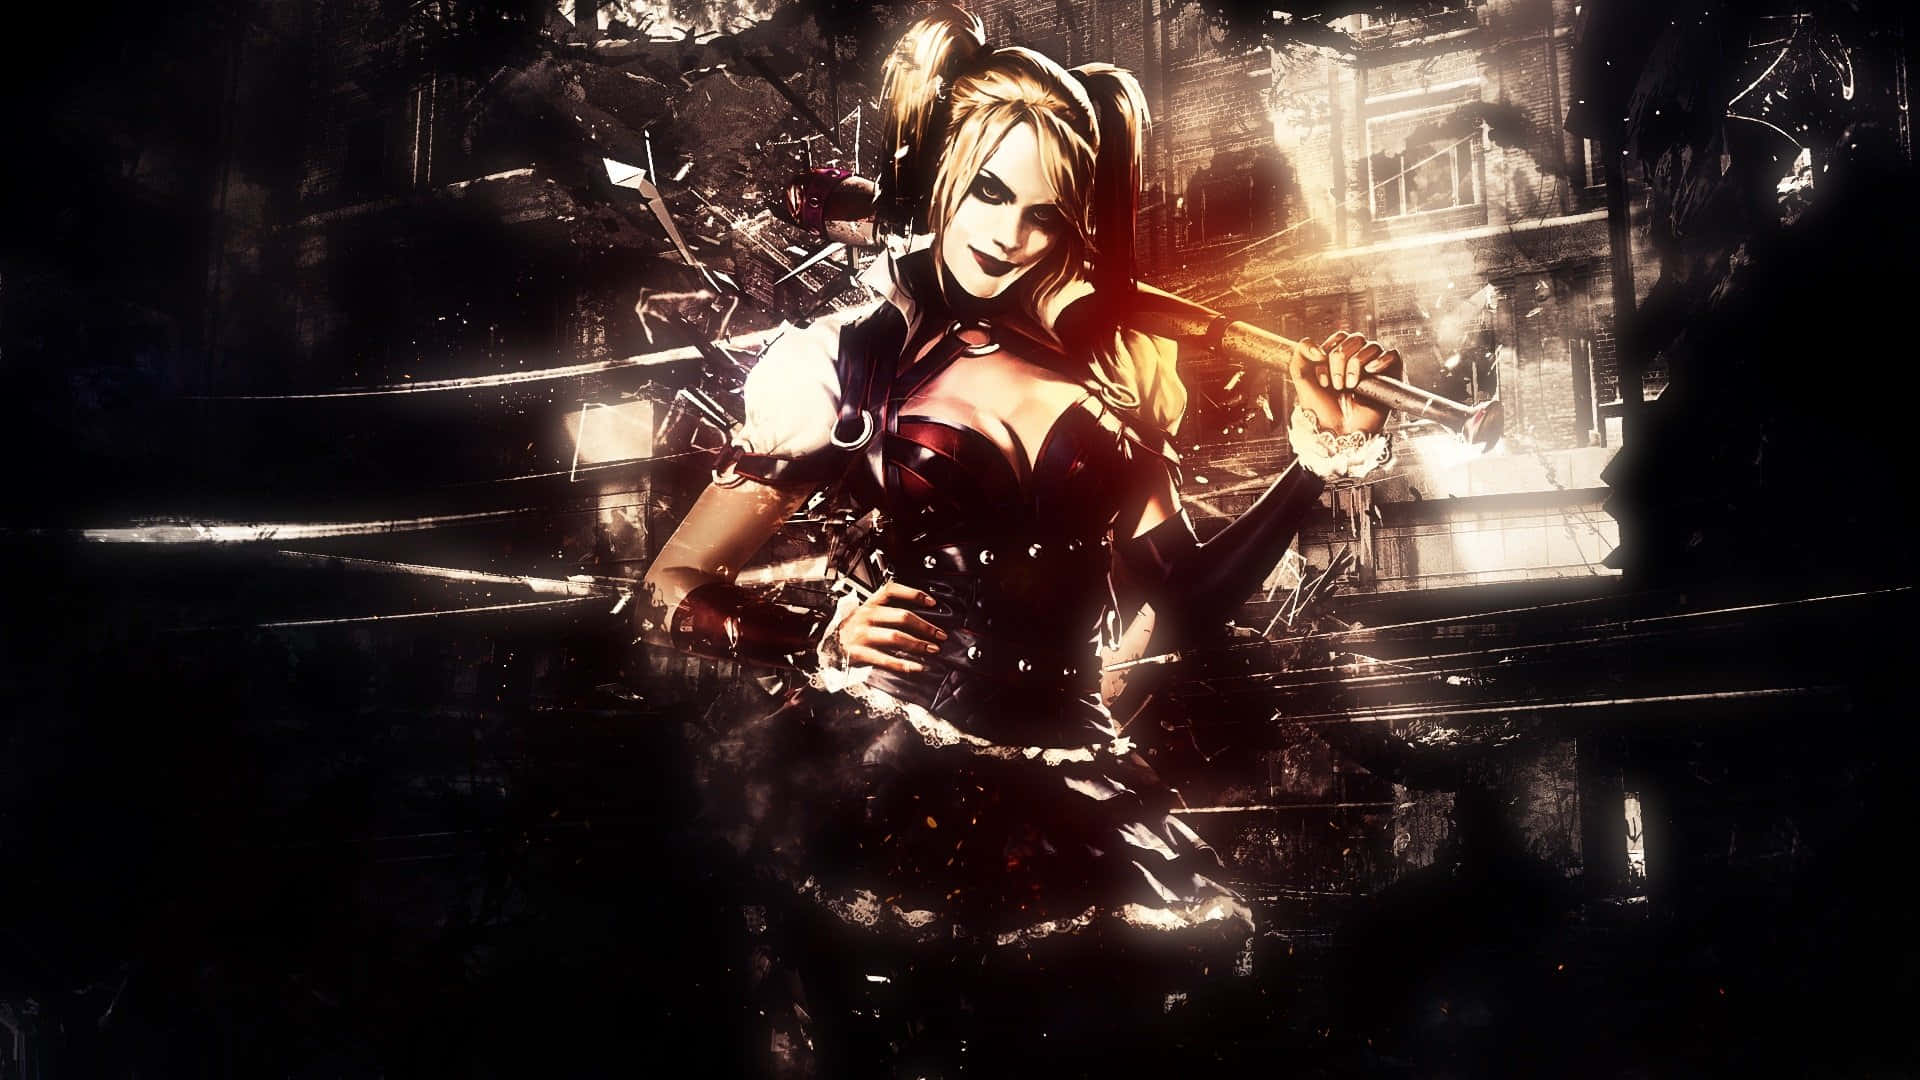 Experience gripping action with Harley Quinn in Batman: Arkham City Wallpaper